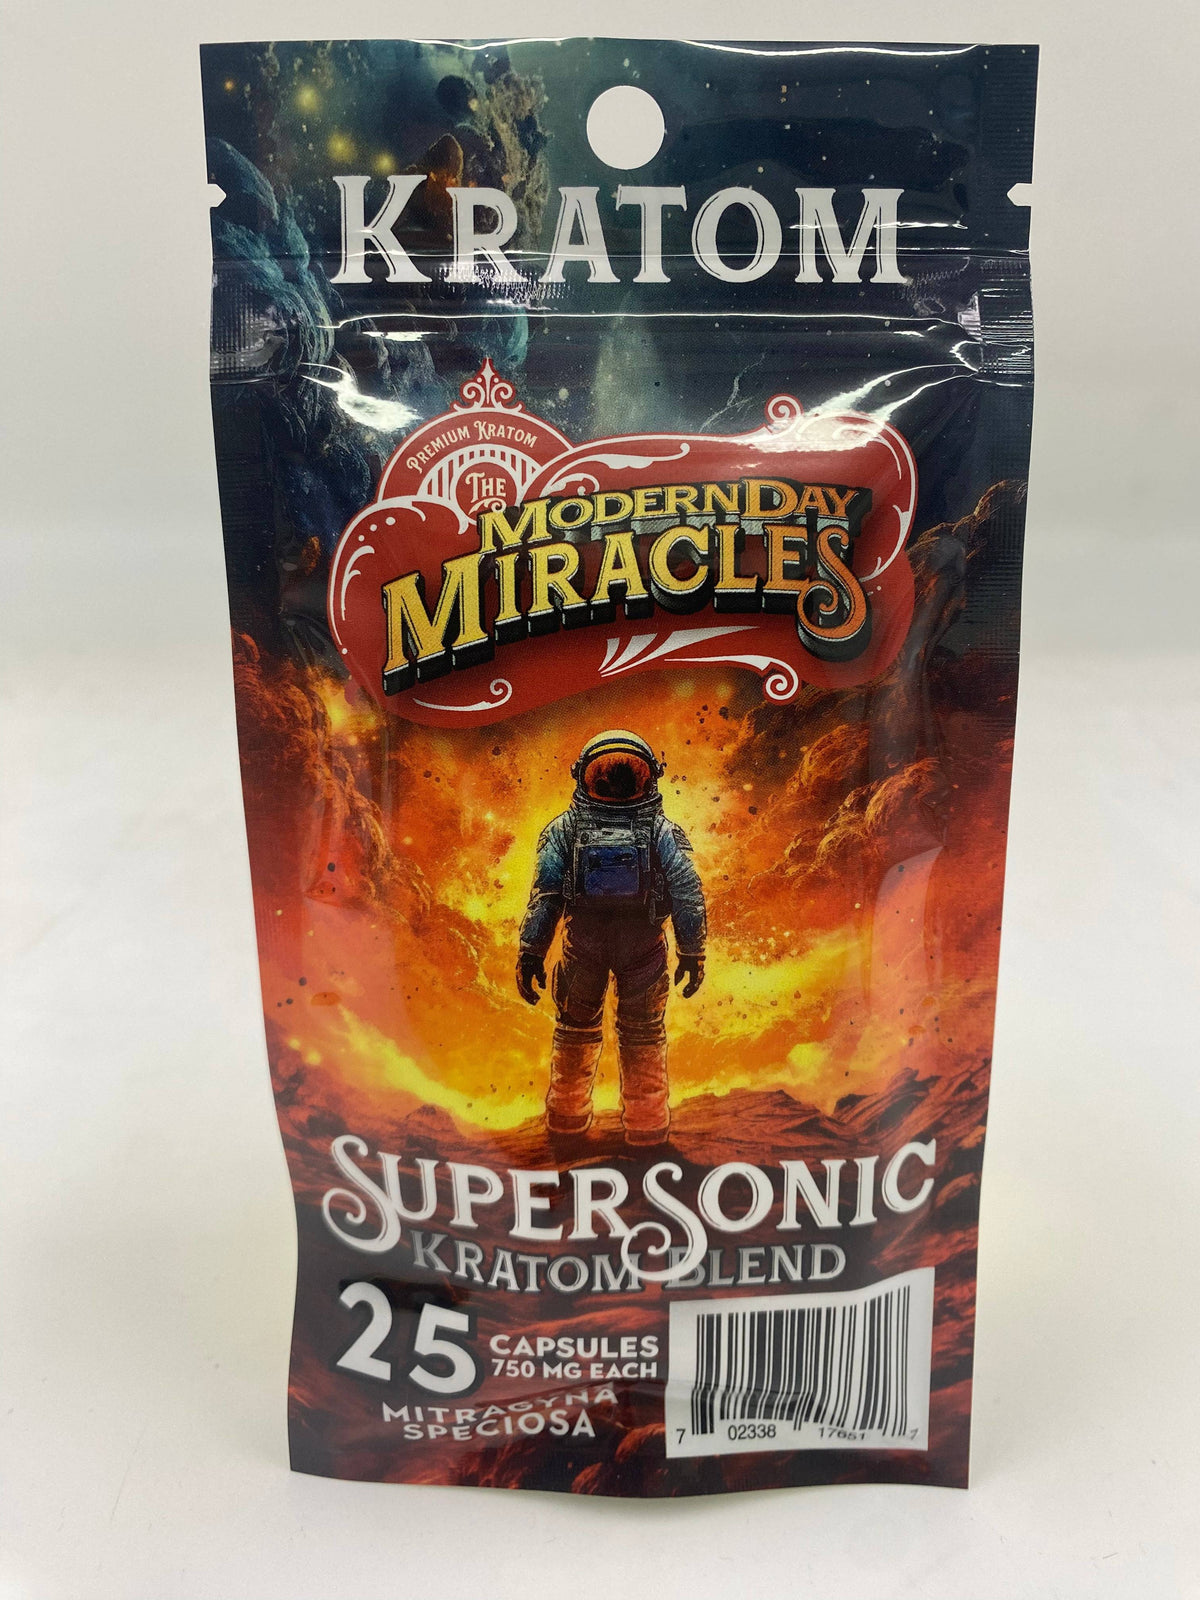 Modern Day Miracles Space Blends- Supersonic Red Kratom Borneo Blend 25ct Capsules